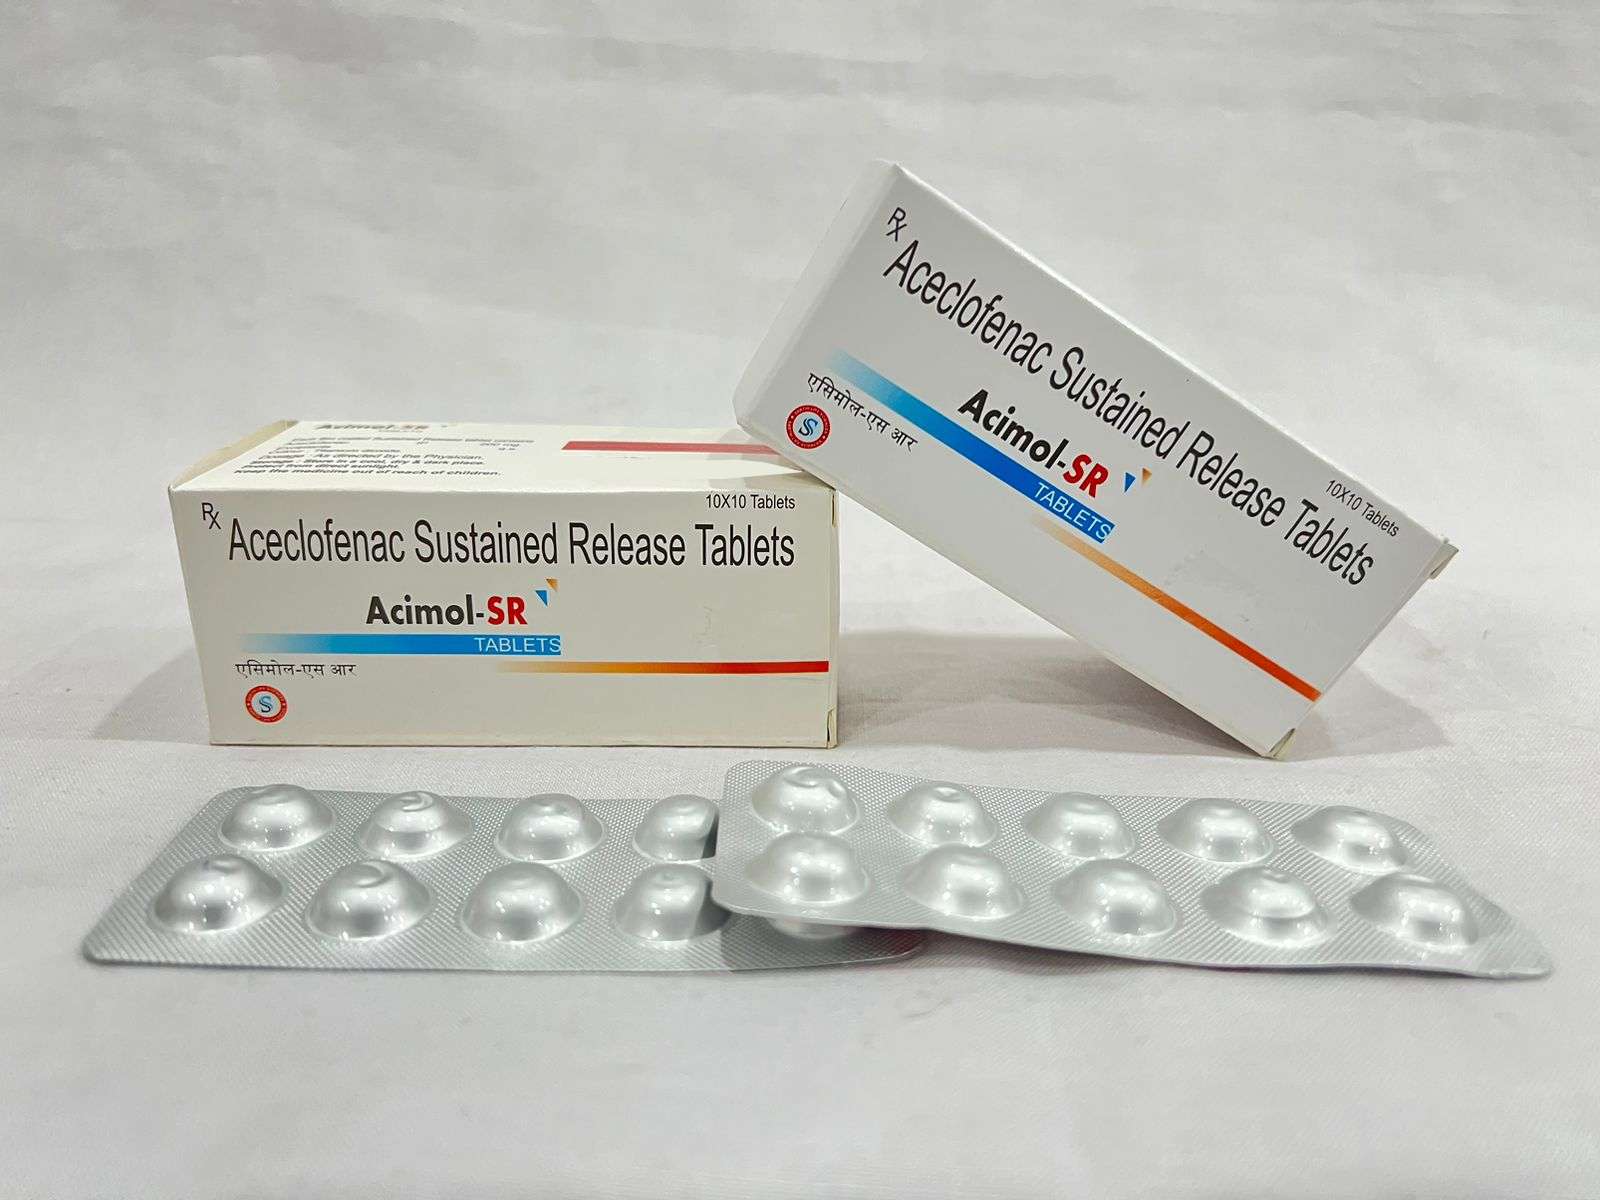 aceclofenac 200mg sustained release
tablets